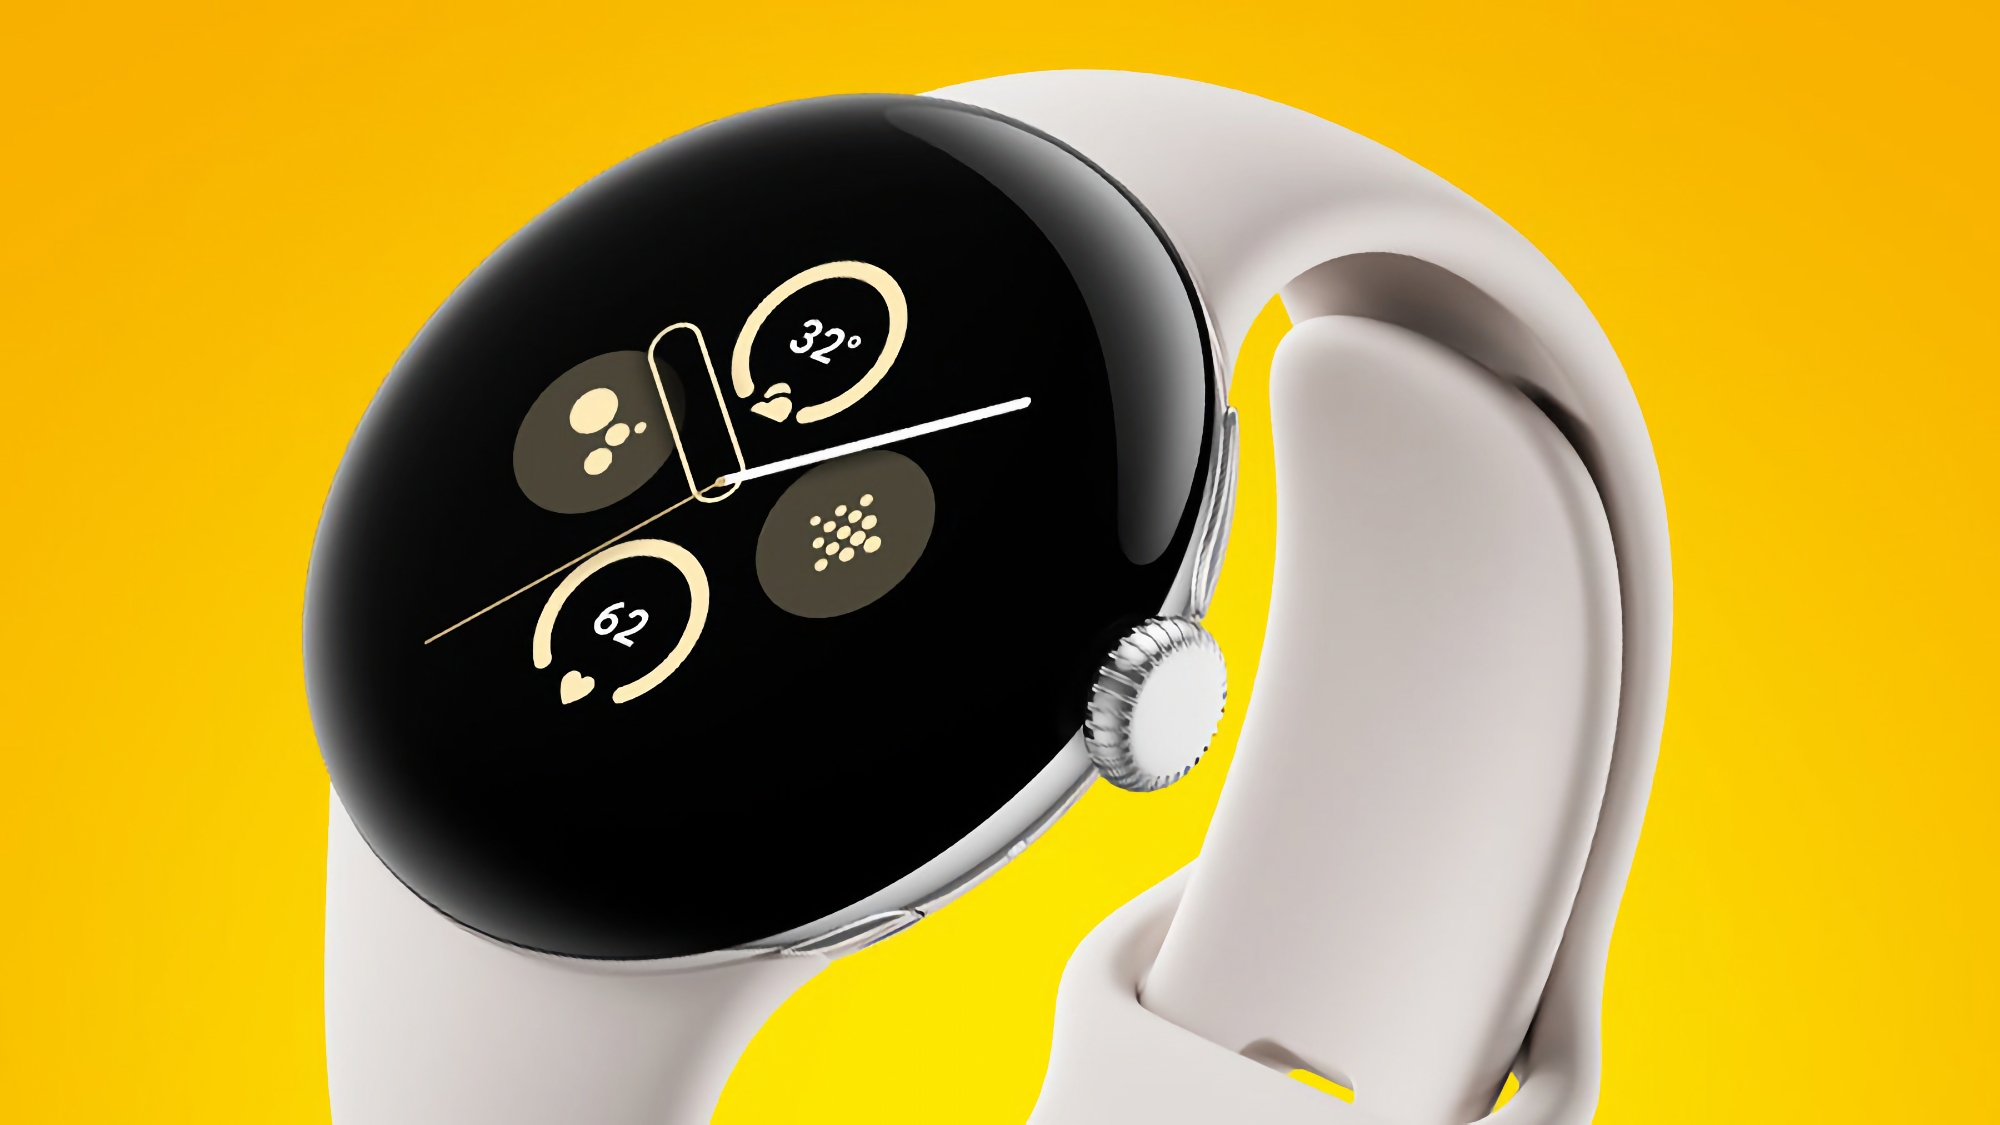 Google Pixel Watch 3 has surfaced in official promotional images